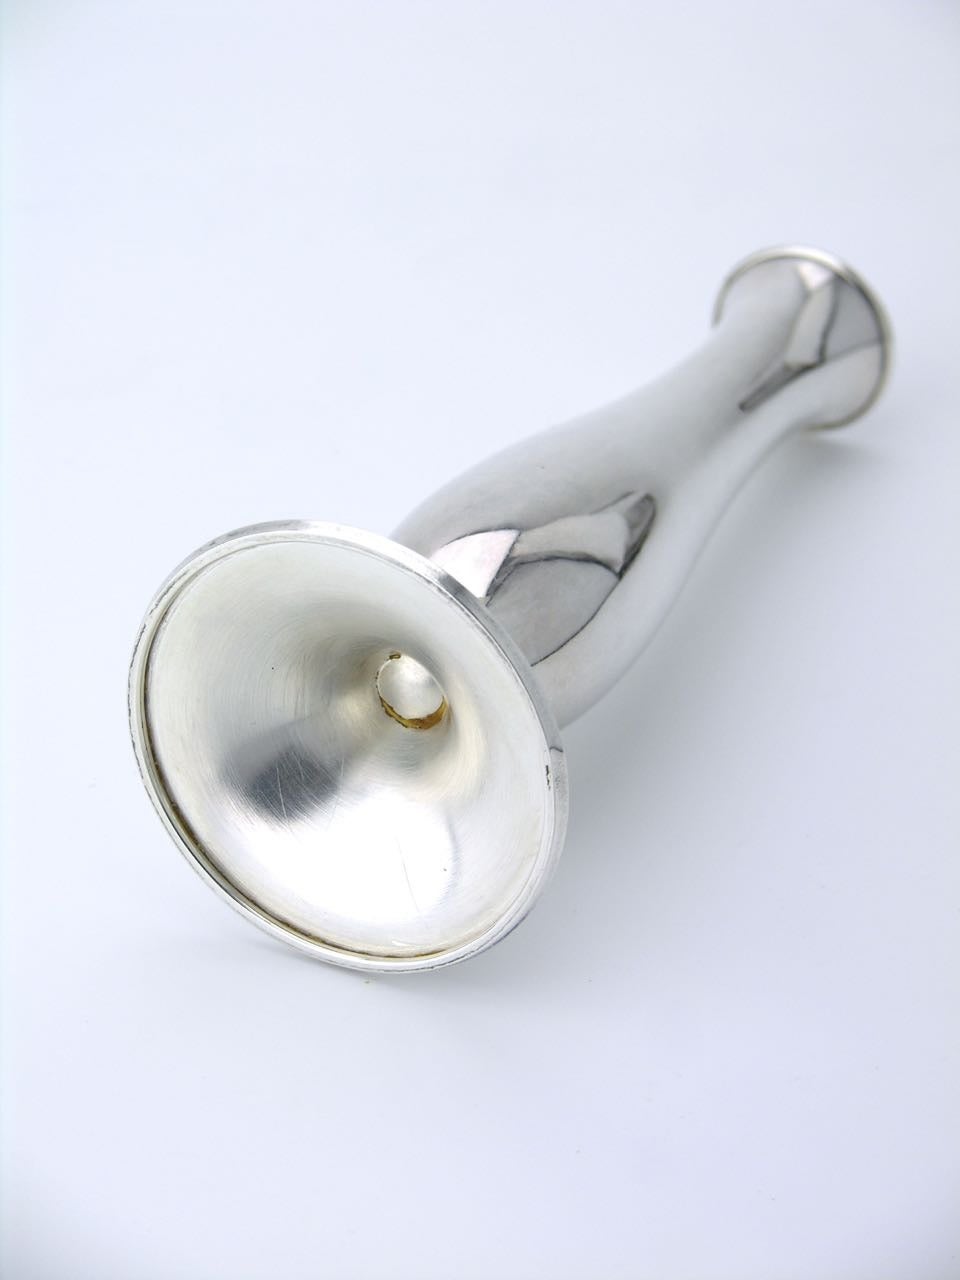 A small bud vase of a tapered bulb form on a flared foot - marked 800 for Continental silver by Jezler of Switzerland.

Jelzer had the exclusive rights to make silver for Bulgari.

Total weight 58 grms.